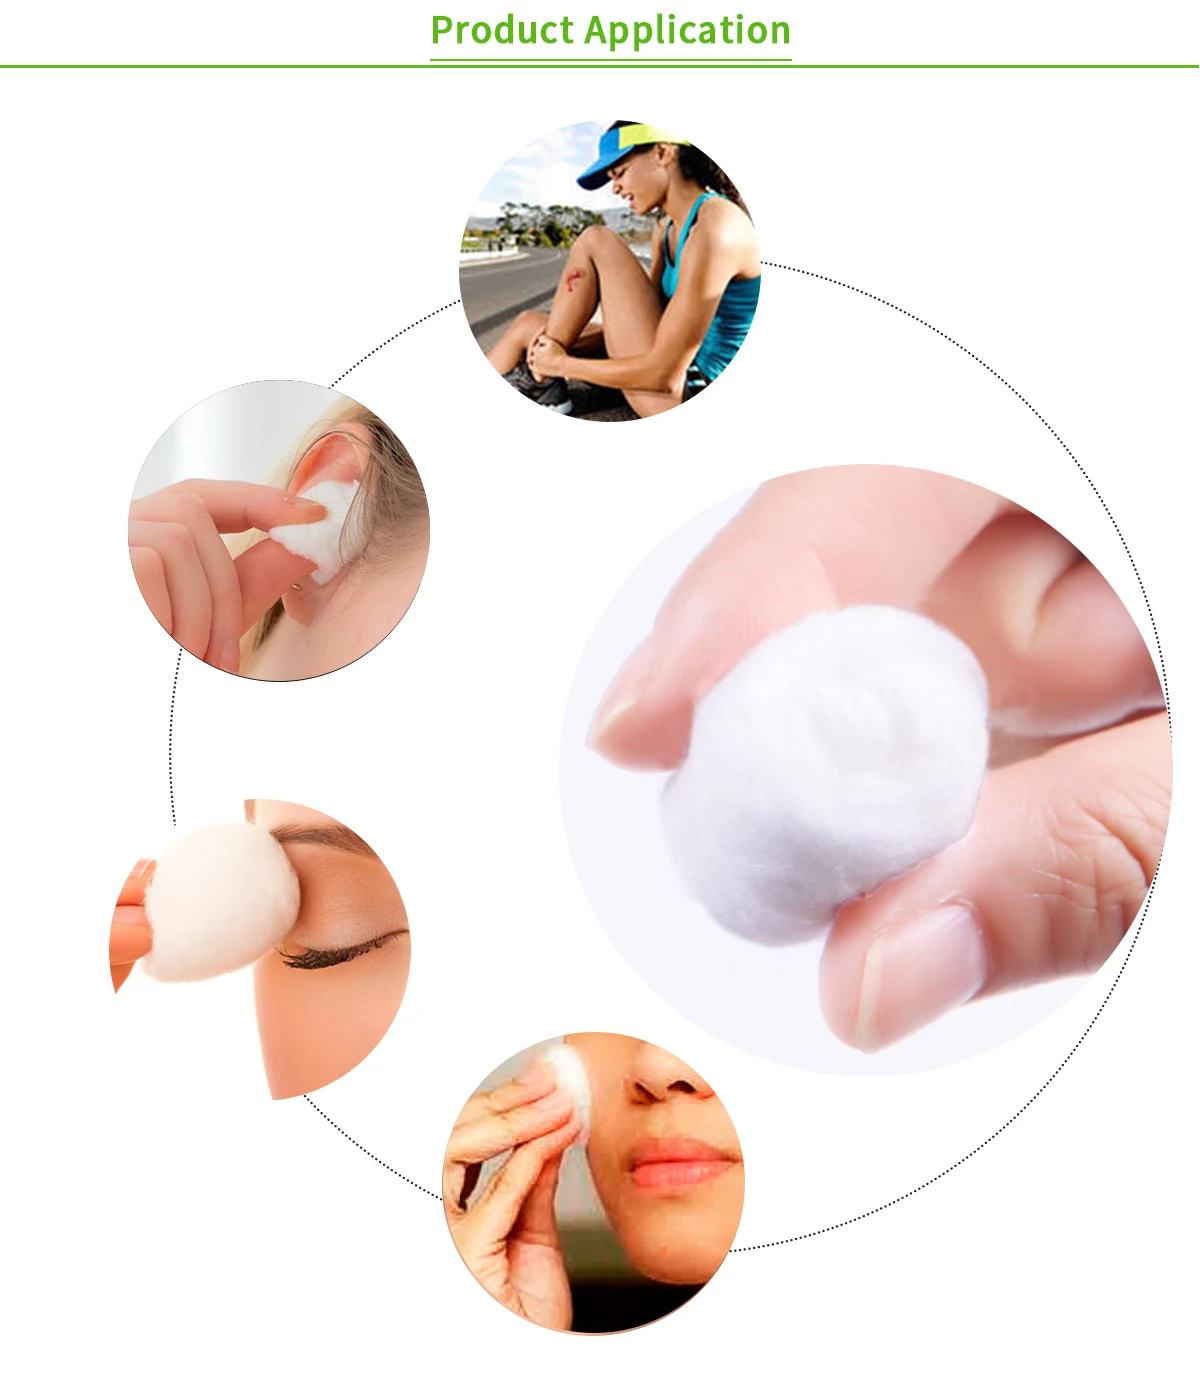 Medical Absorbent Cotton Balls Medical Materials & Accessories 50000 Bags Free EO 100% Cotton CE Approved 100pcs 2 Years Class I